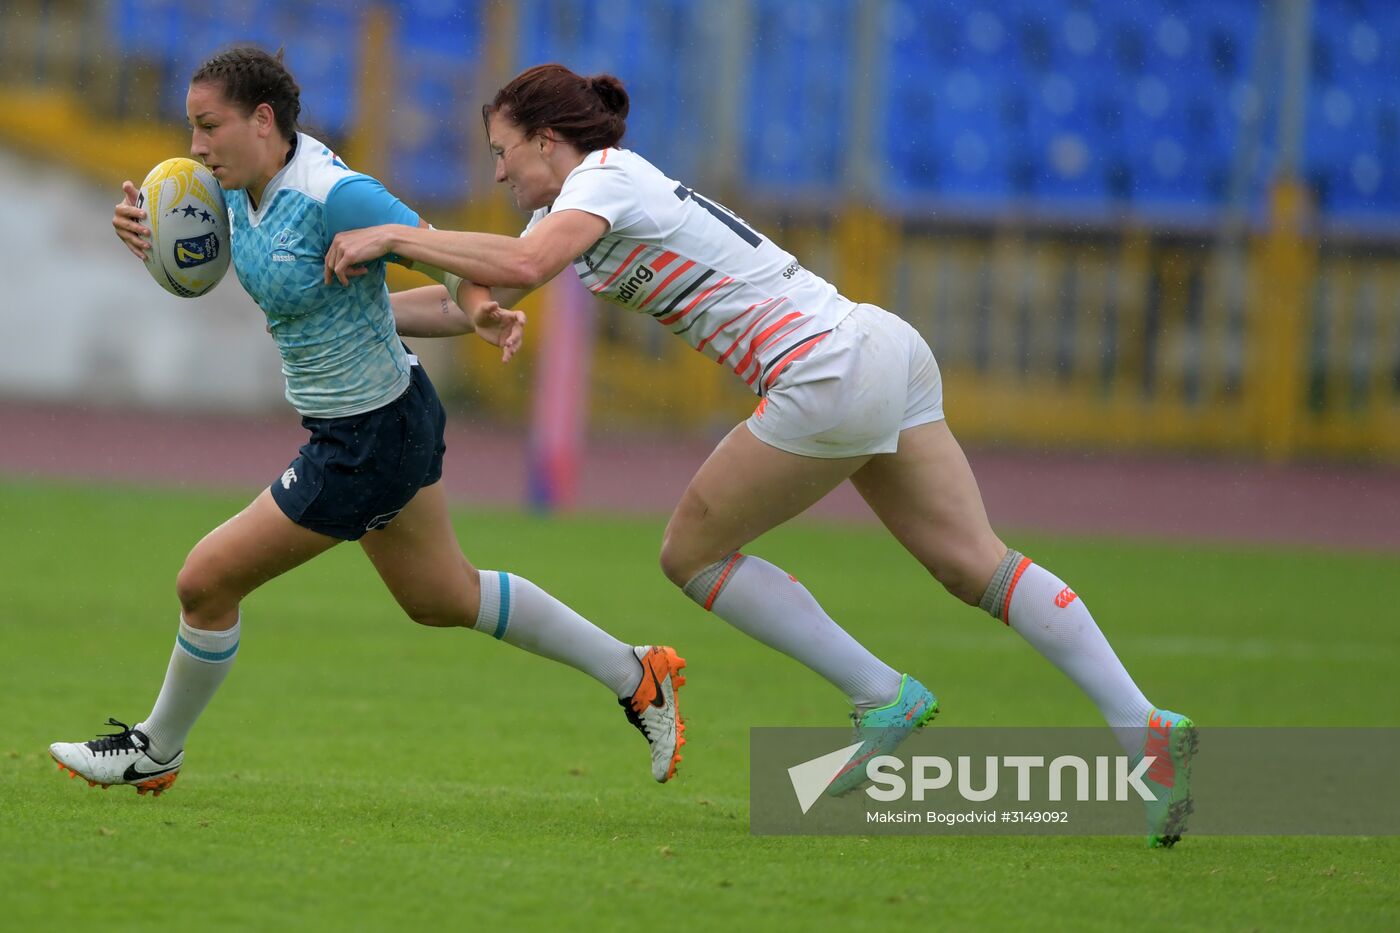 2017 Rugby Europe Women's Sevens Championships. Grand Prix